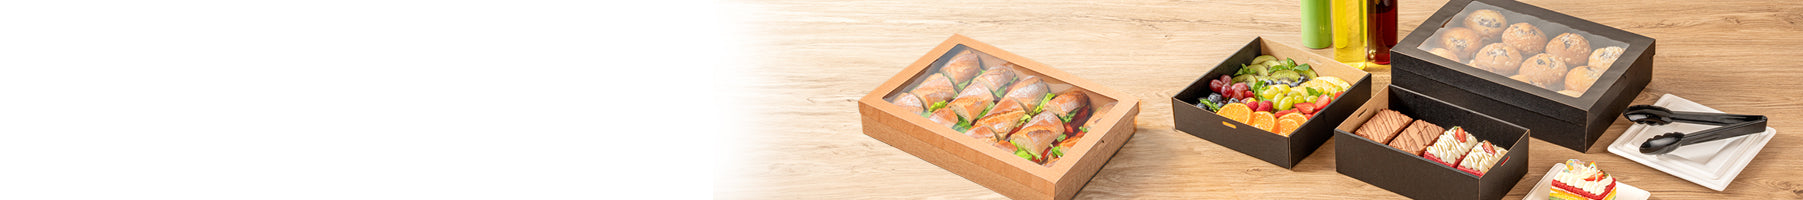 Banner_Disposables_Take-Out_Catering-Boxes_426